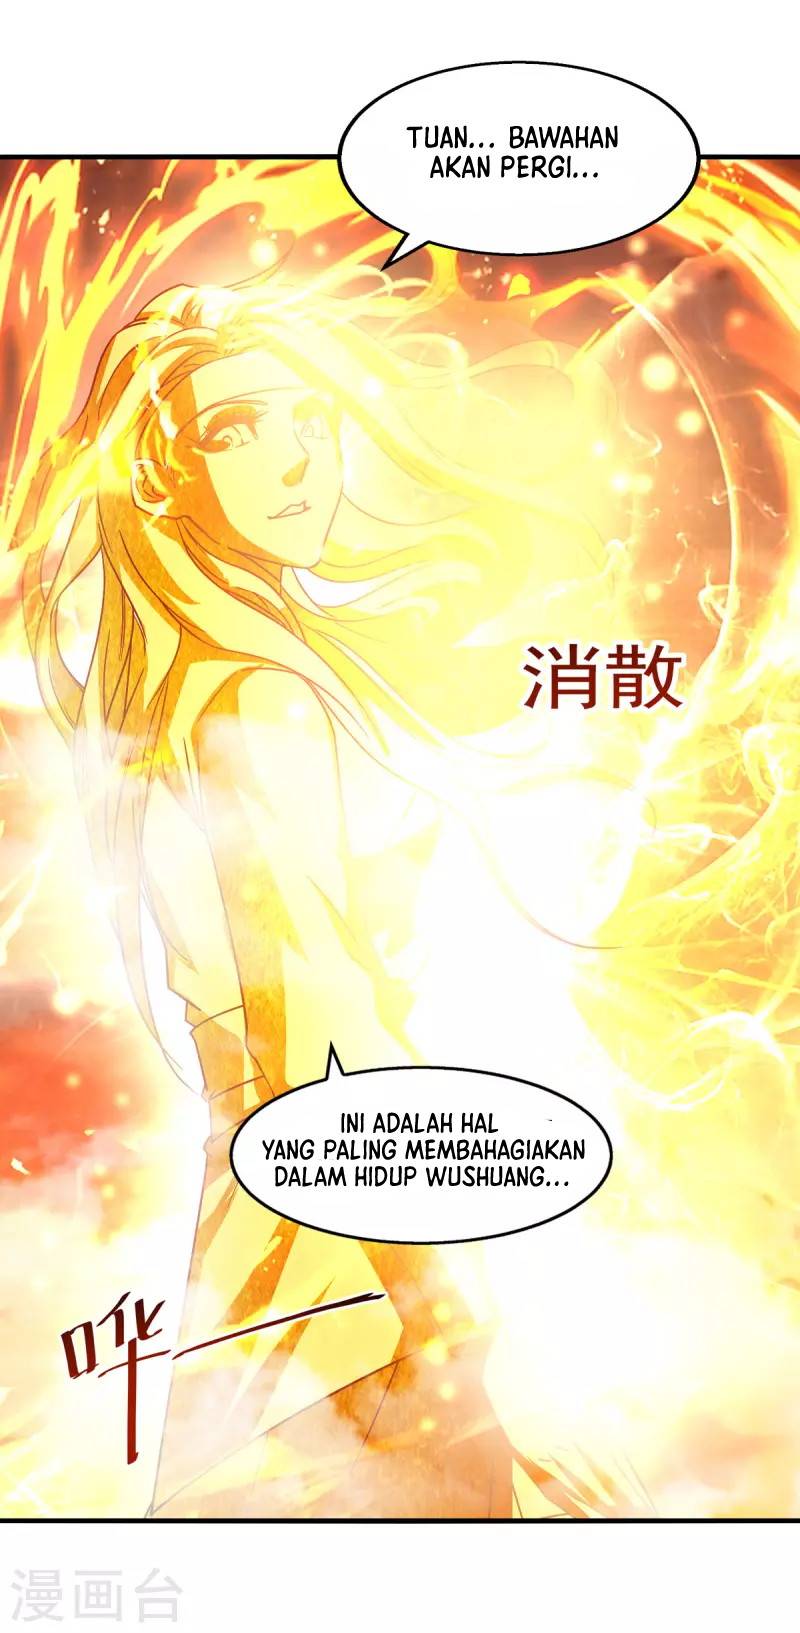 Against The Heaven Supreme (Heaven Guards) Chapter 72 - 191